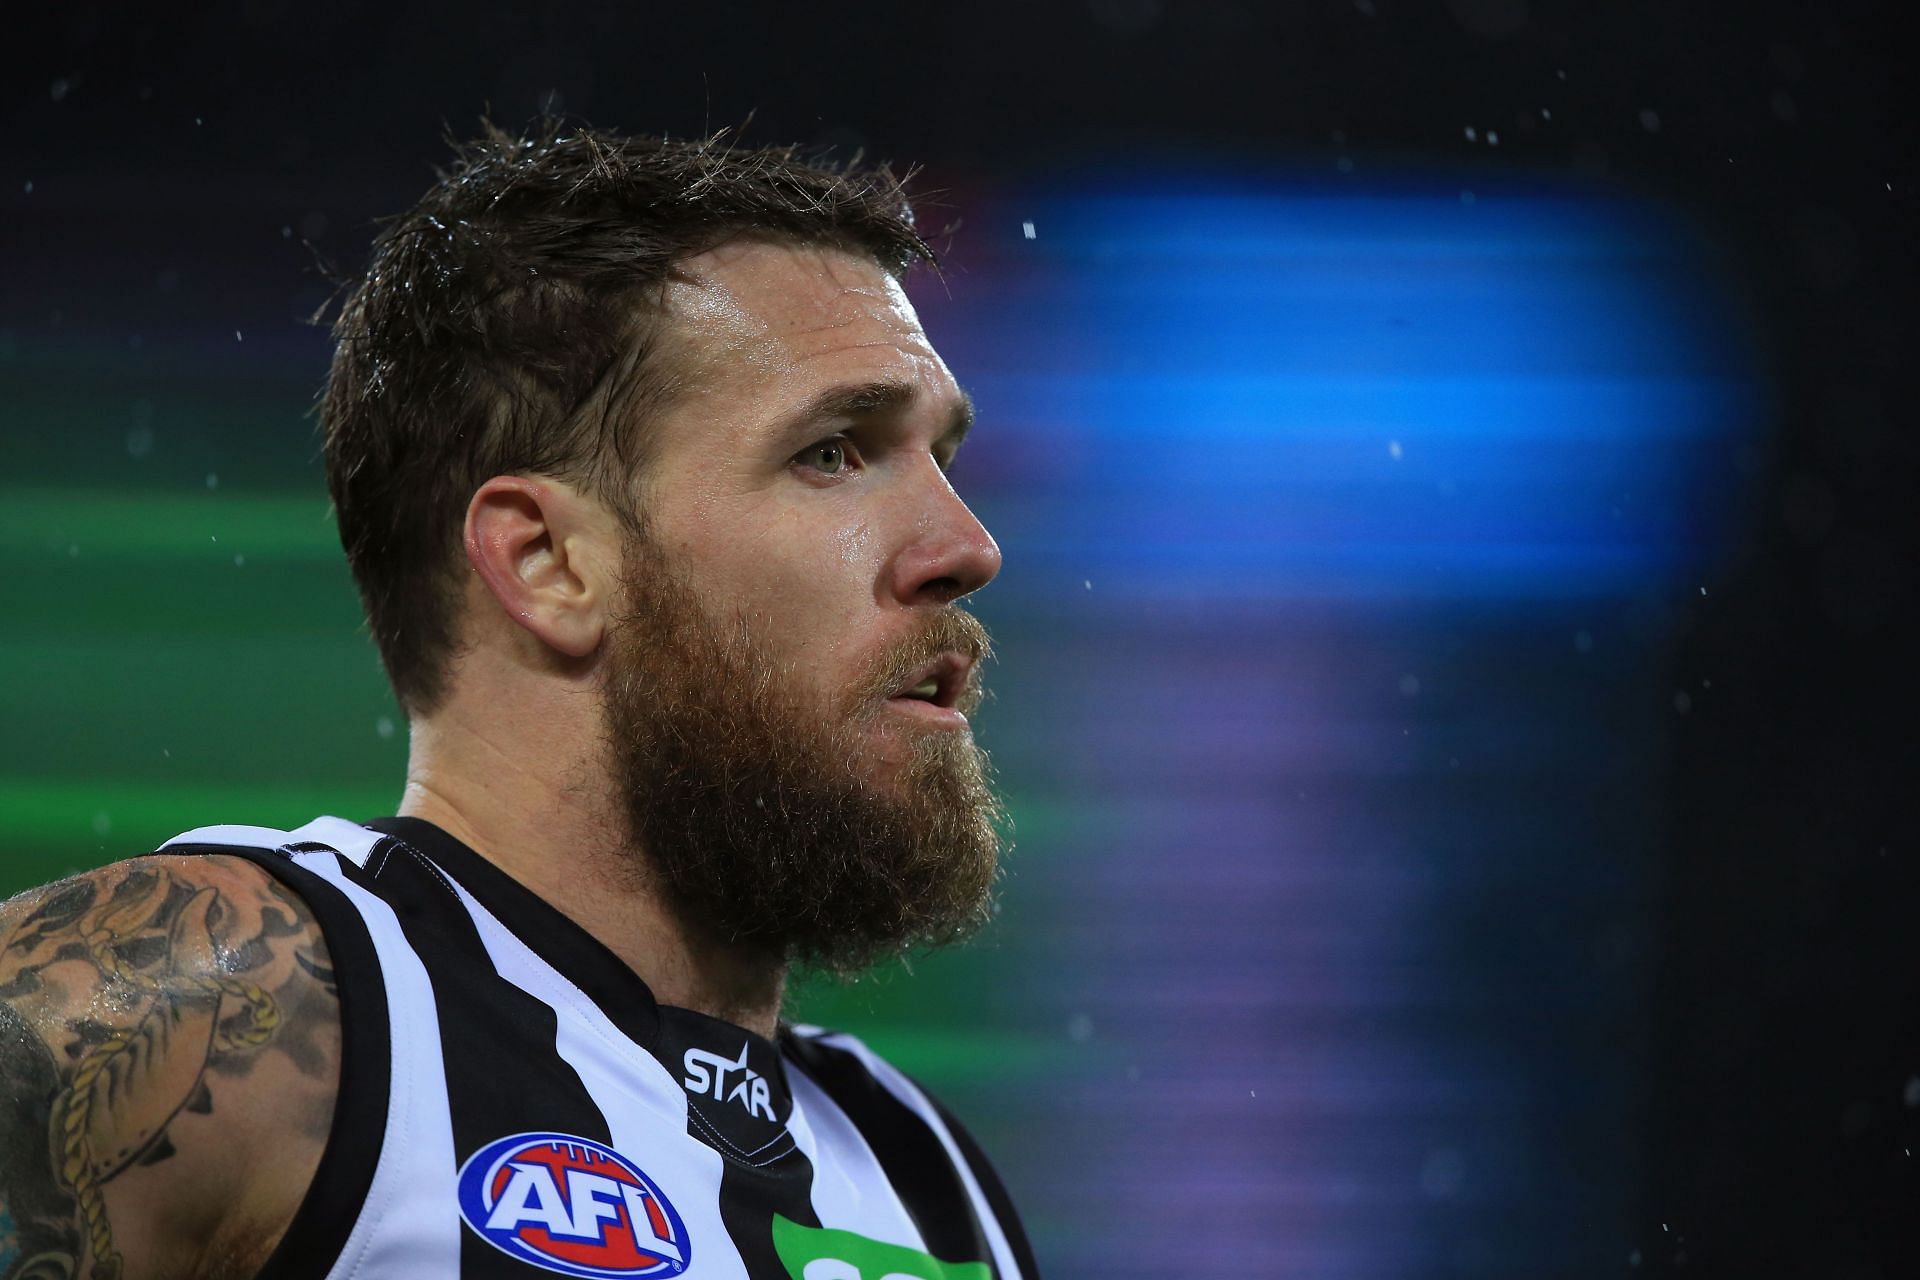 Dane Swan of the Magpies